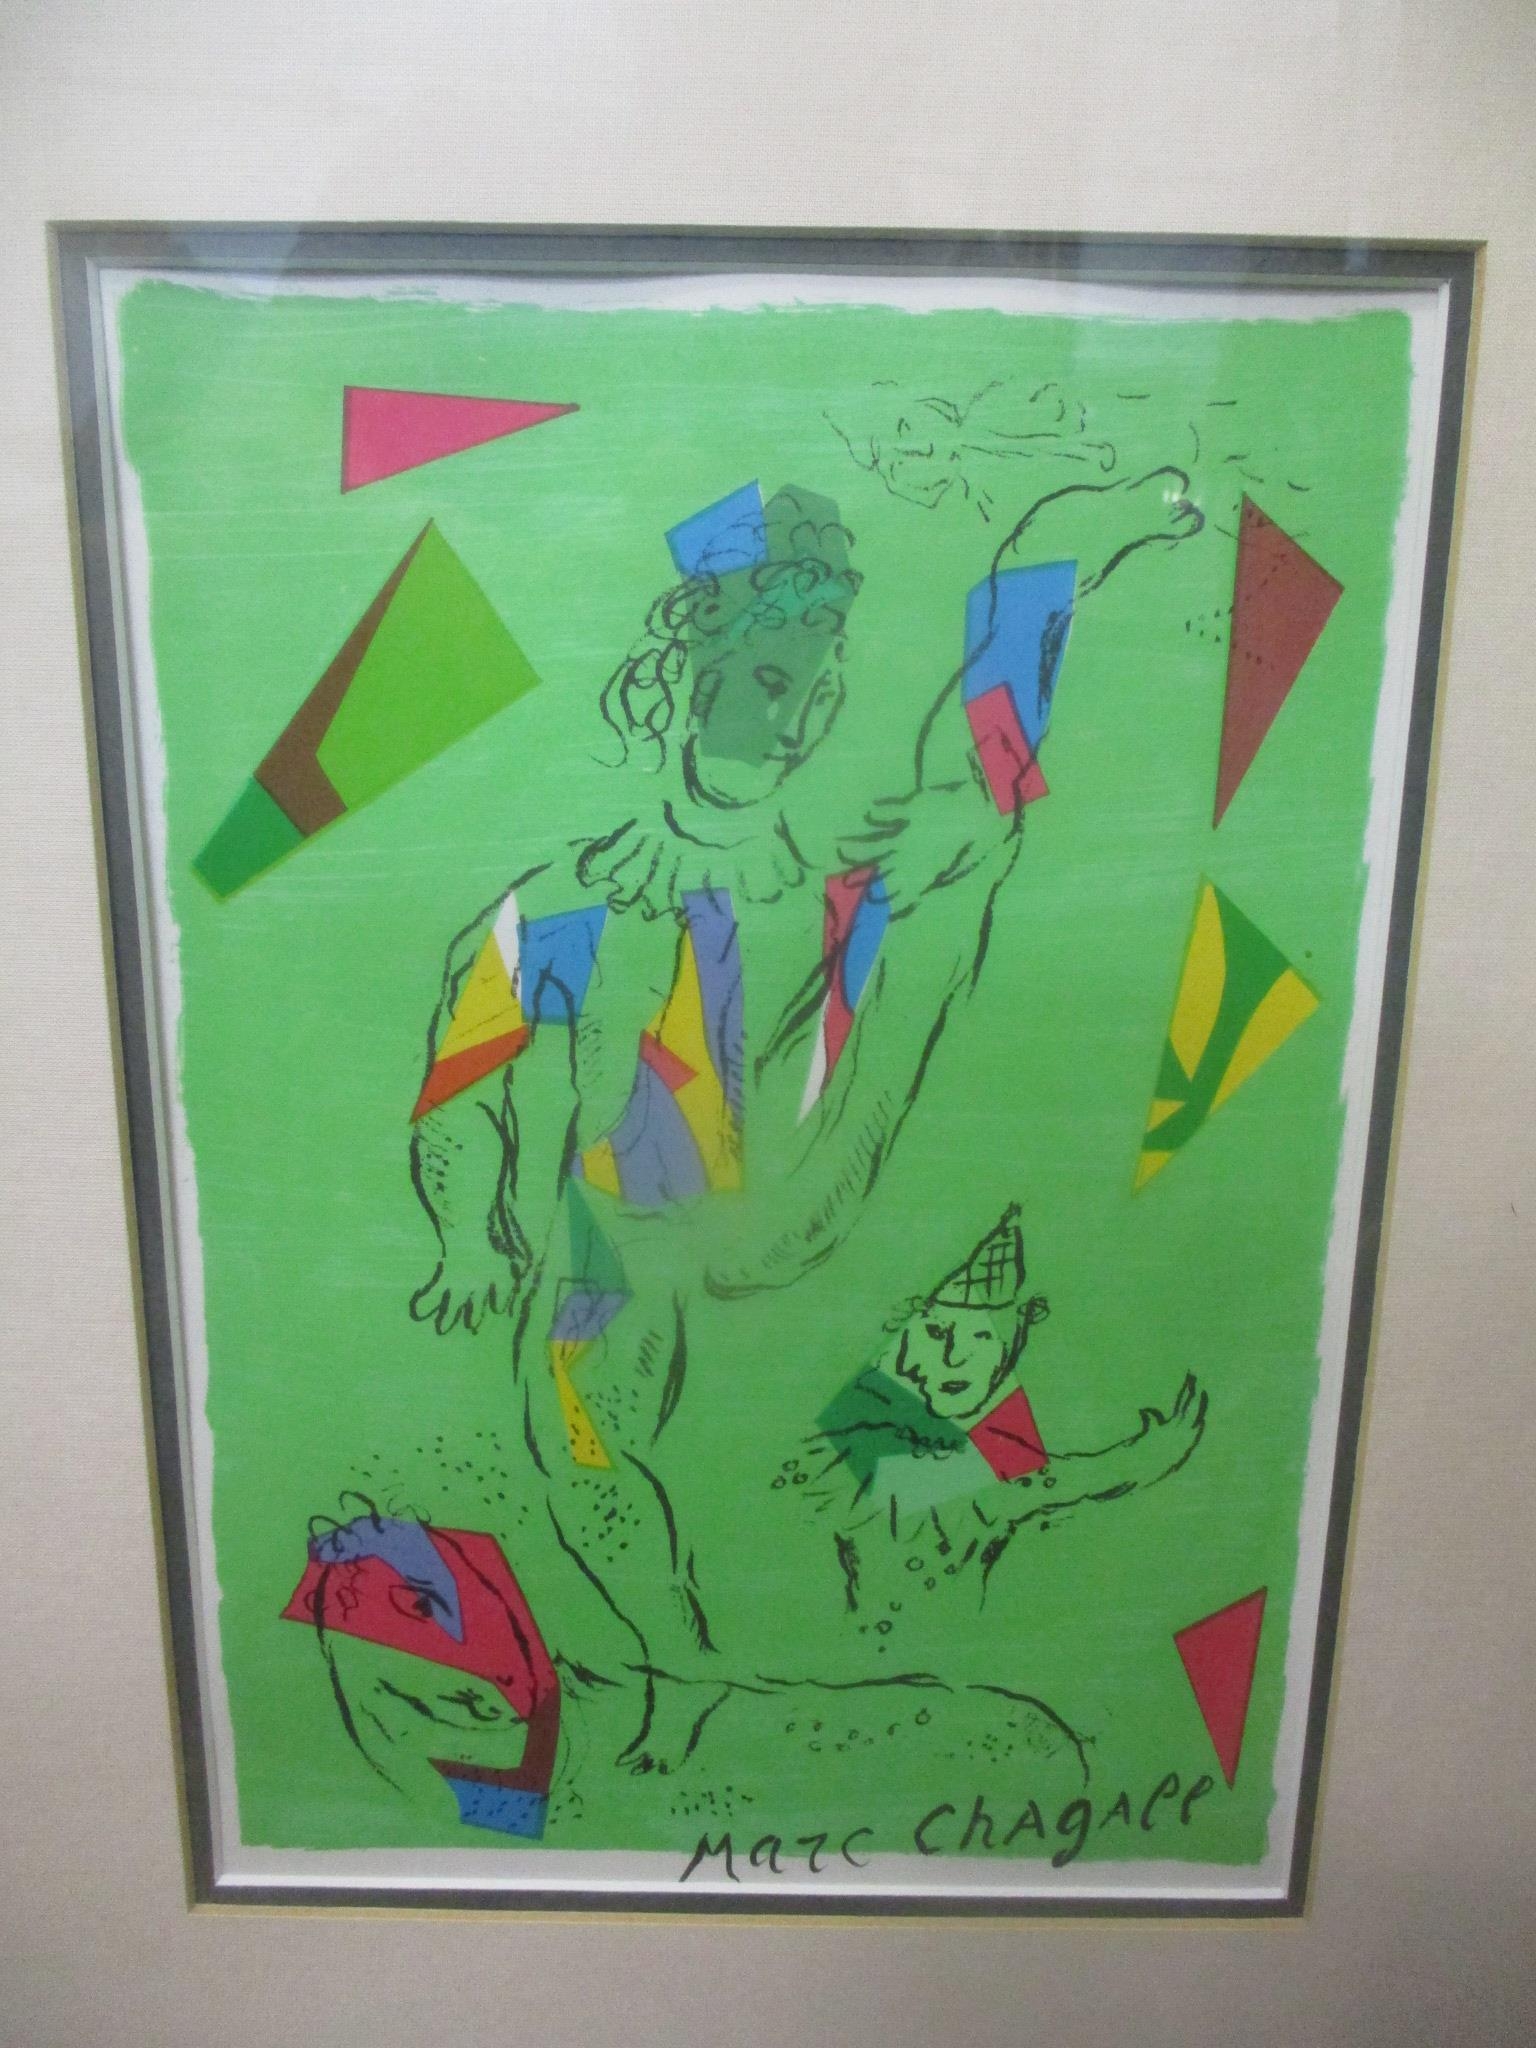 George Donald - 'Love Song' artist proof prints and after Marc Chagall print, framed and glazed - Image 2 of 4